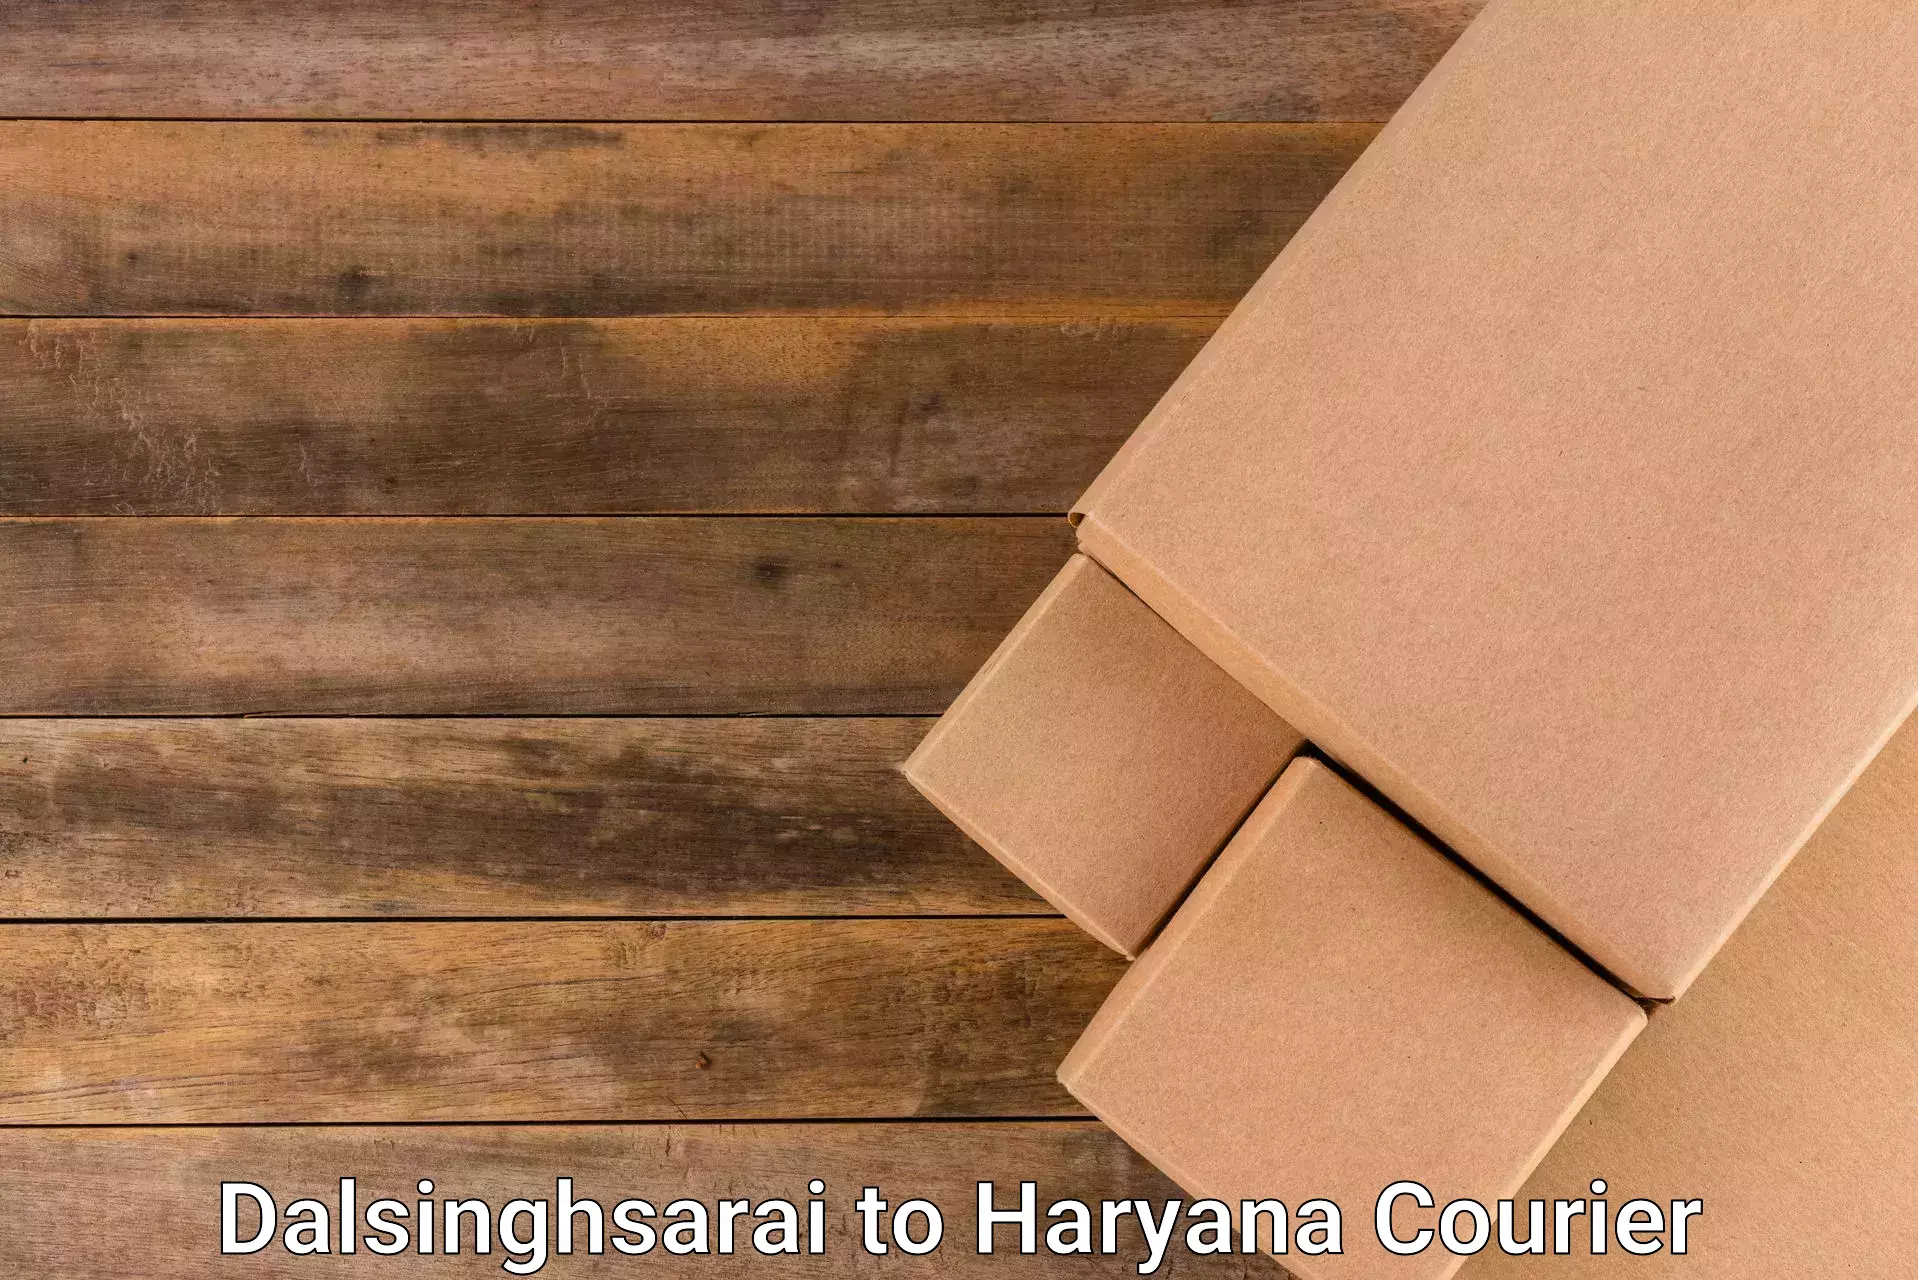 Round-the-clock parcel delivery Dalsinghsarai to Sirsa